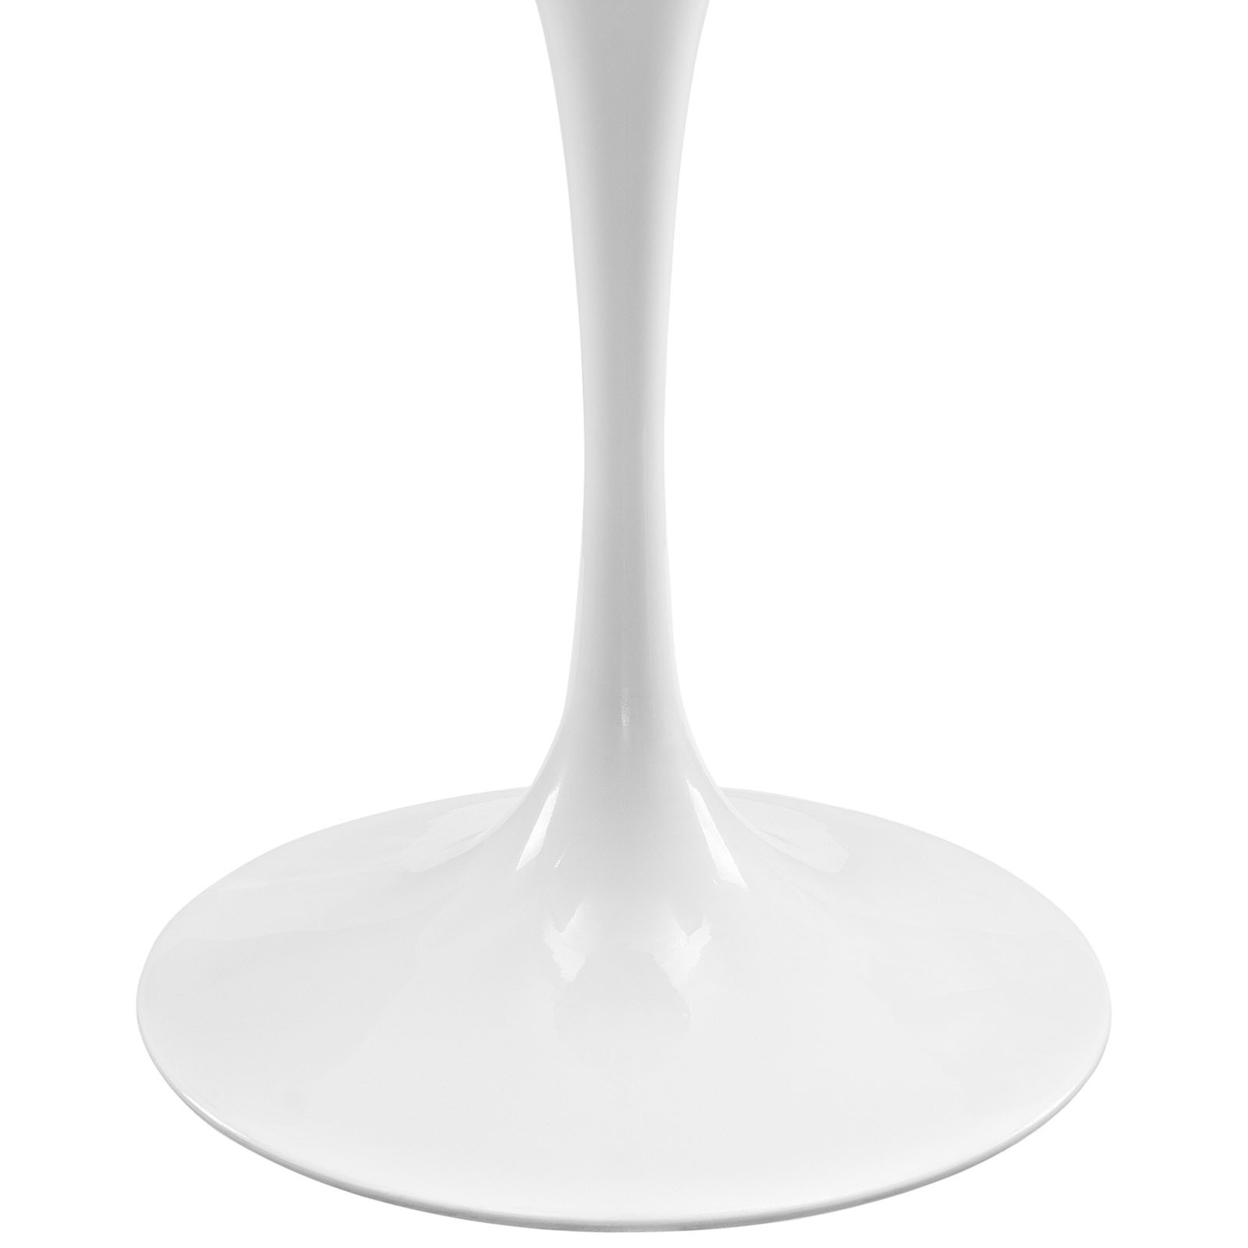 White Lippa 48 Oval-Shaped Artificial Marble Dining Table